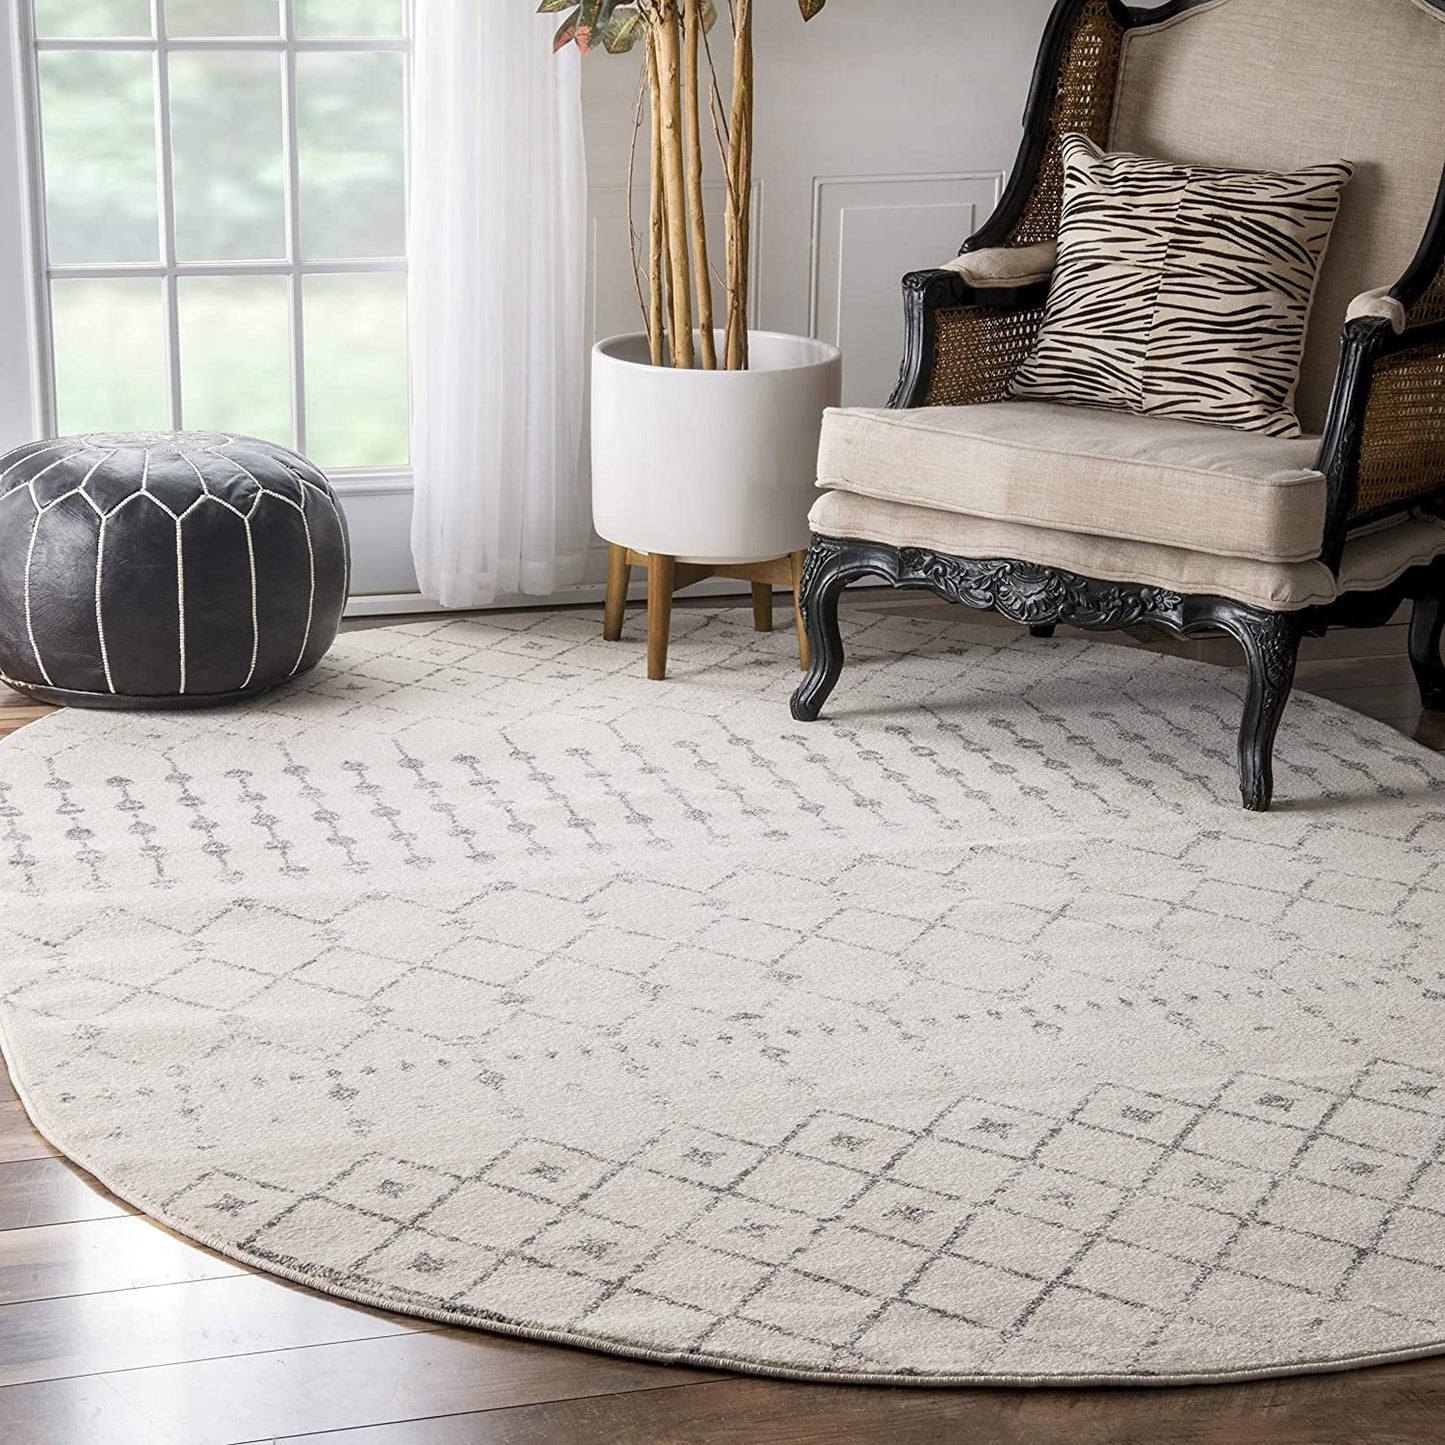 nuLOOM Moroccan Blythe Area Rug, 6' 7" x 9' Oval, Grey/Off-white